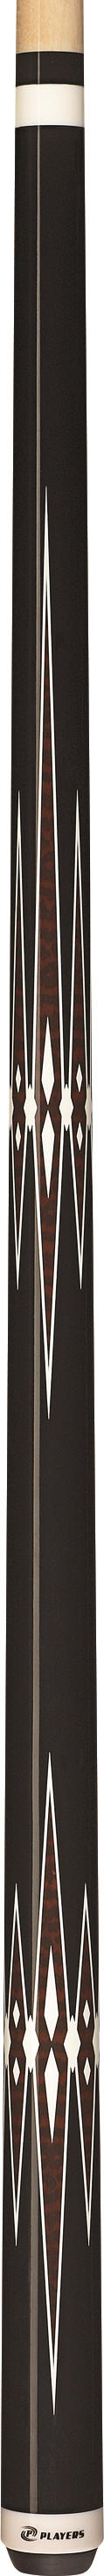 Players HXT-4 Pool Cue